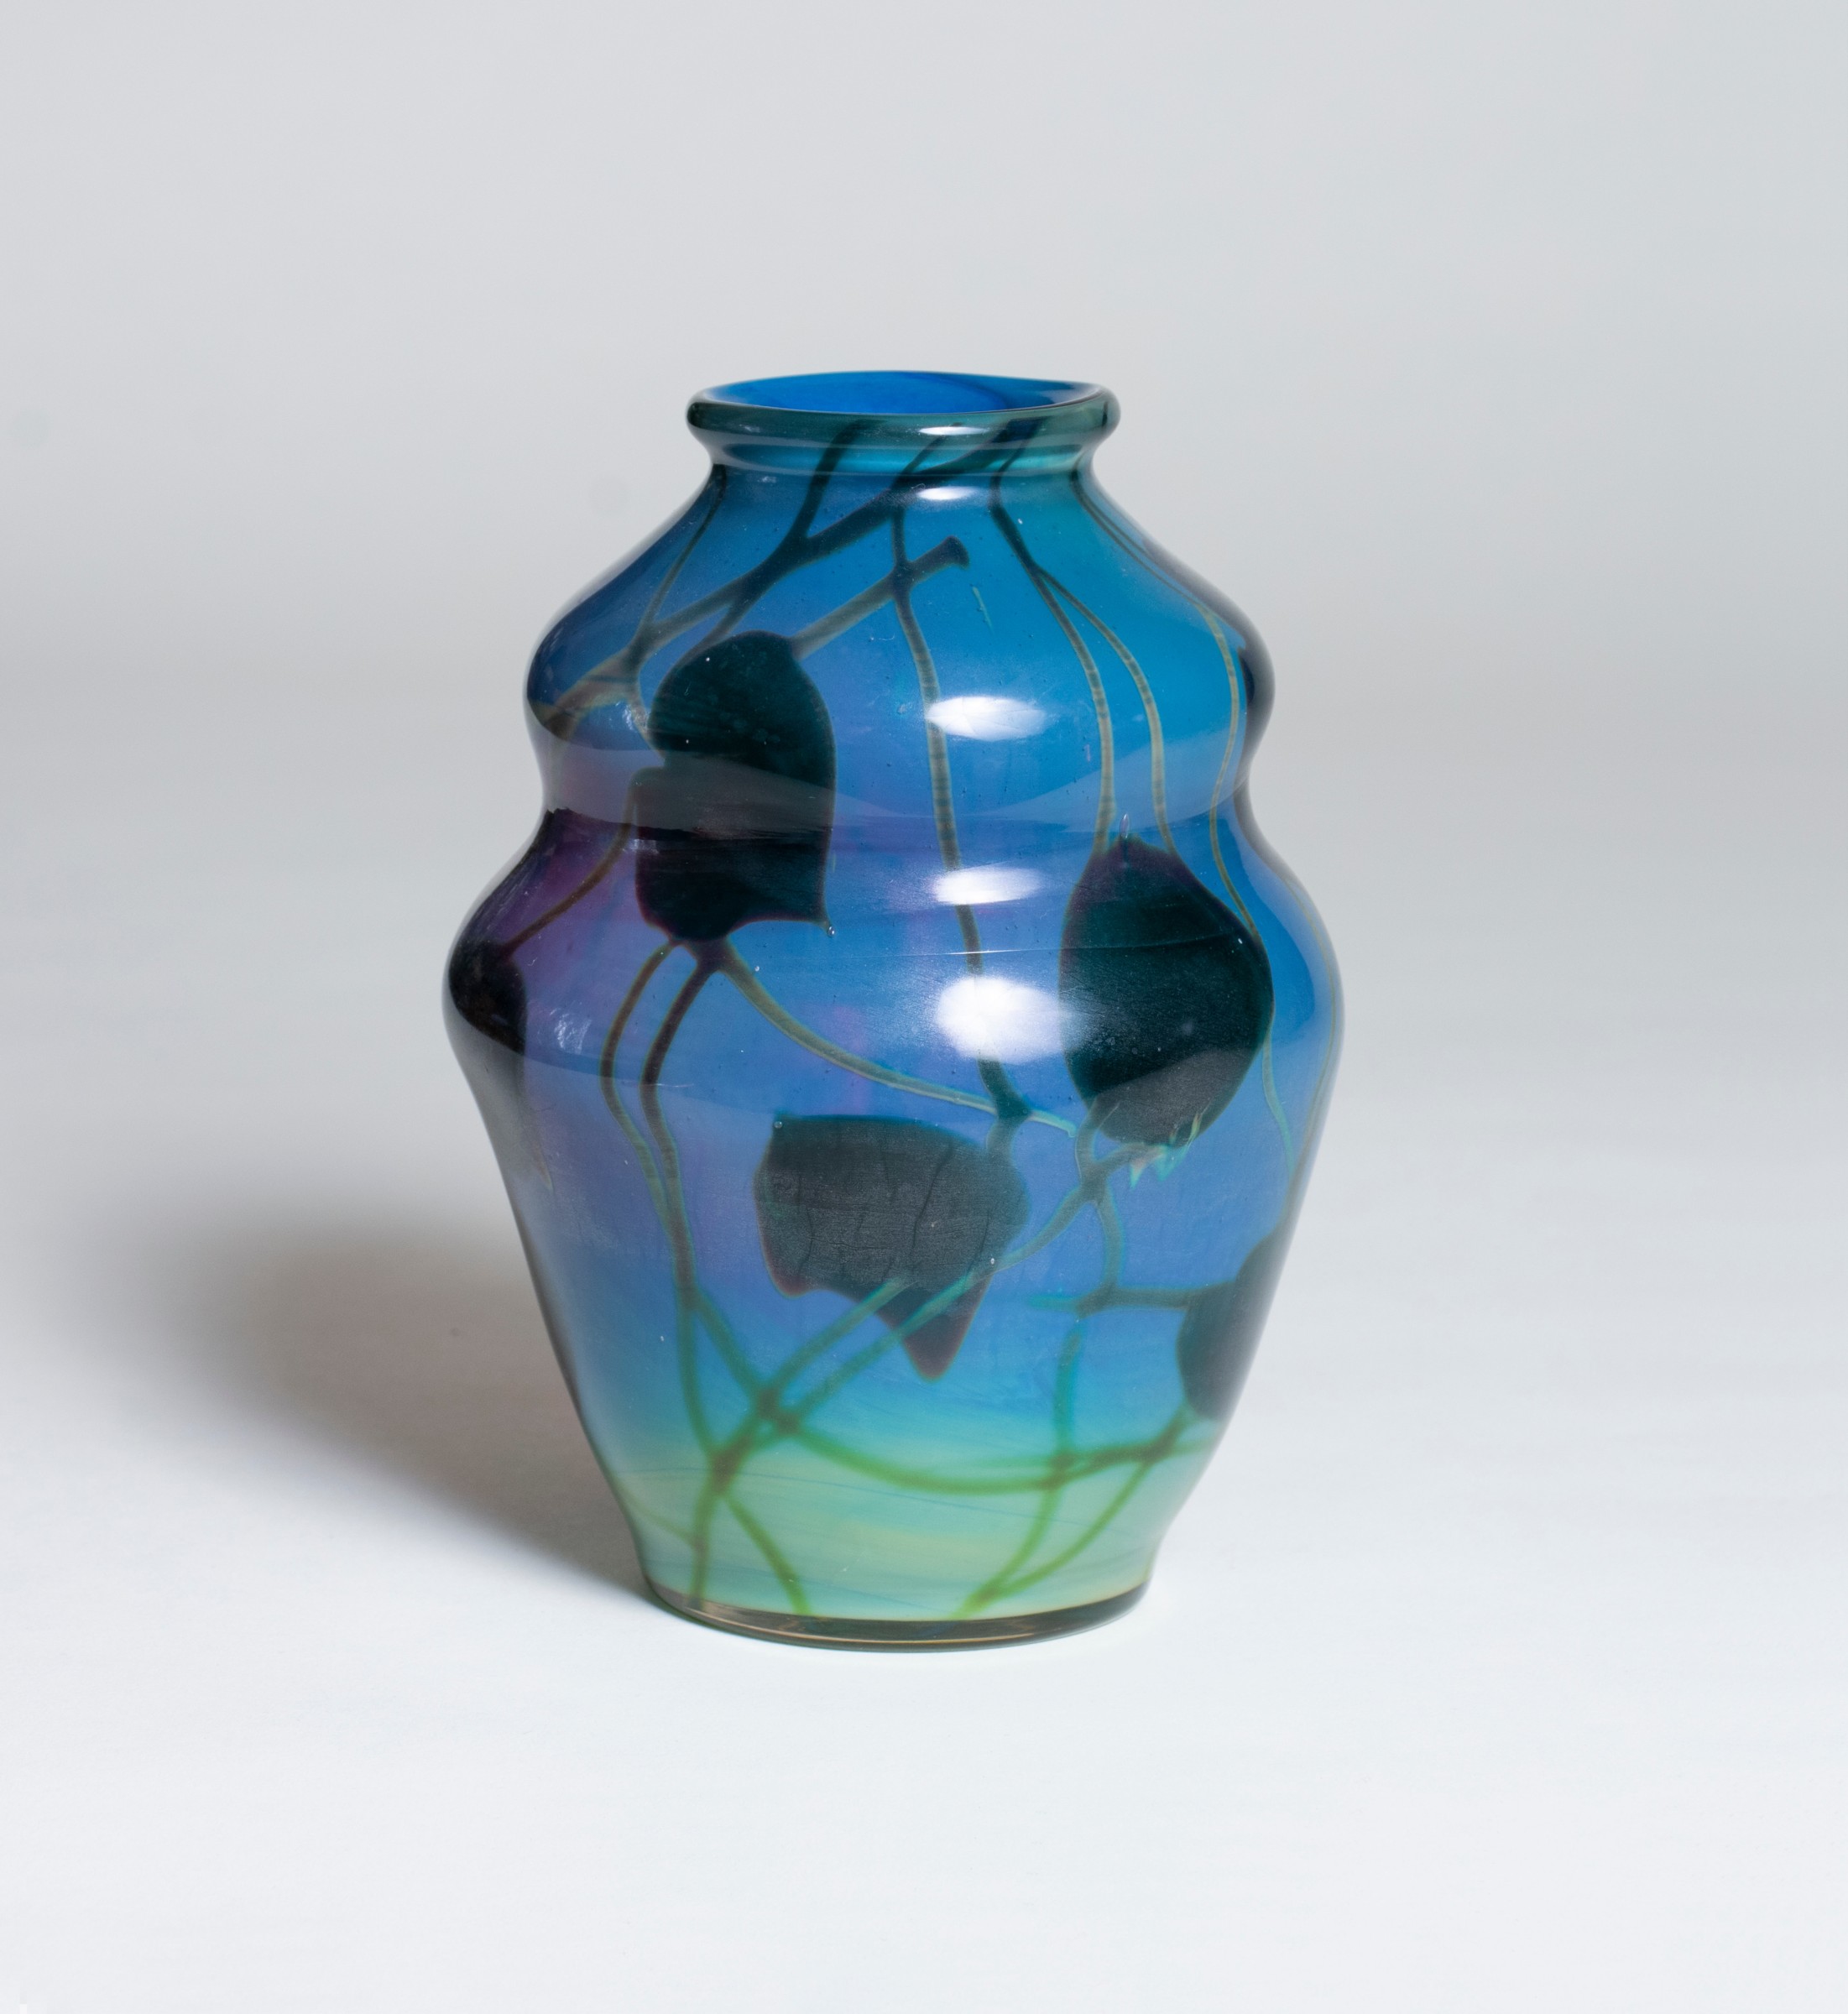 A tiffany favrile glass reactive paperweight style vase, the blue double gourd shaped body shifting in color and opacity as you move around the vase, decorated with all over motif of swirling vines and heart shaped leaves in a dark green glass. The vase appears to be solid and a brighter color blue in reflected light.